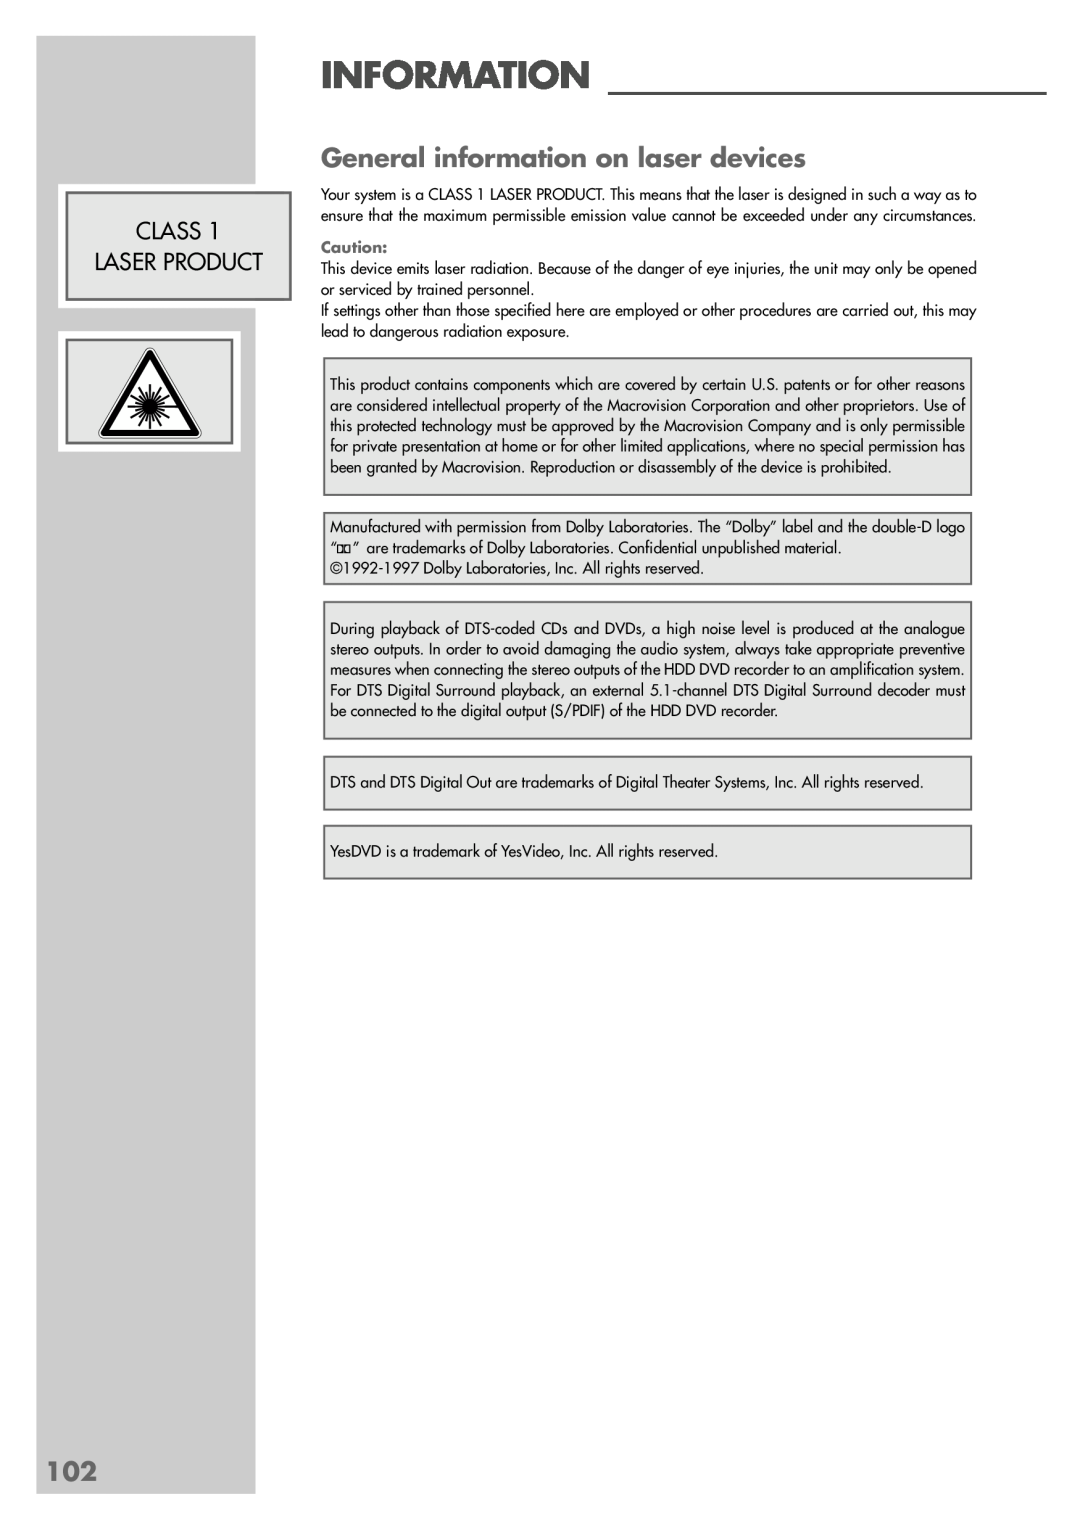 Grundig 5550 HDD manual General information on laser devices, Information, Class Laser Product 